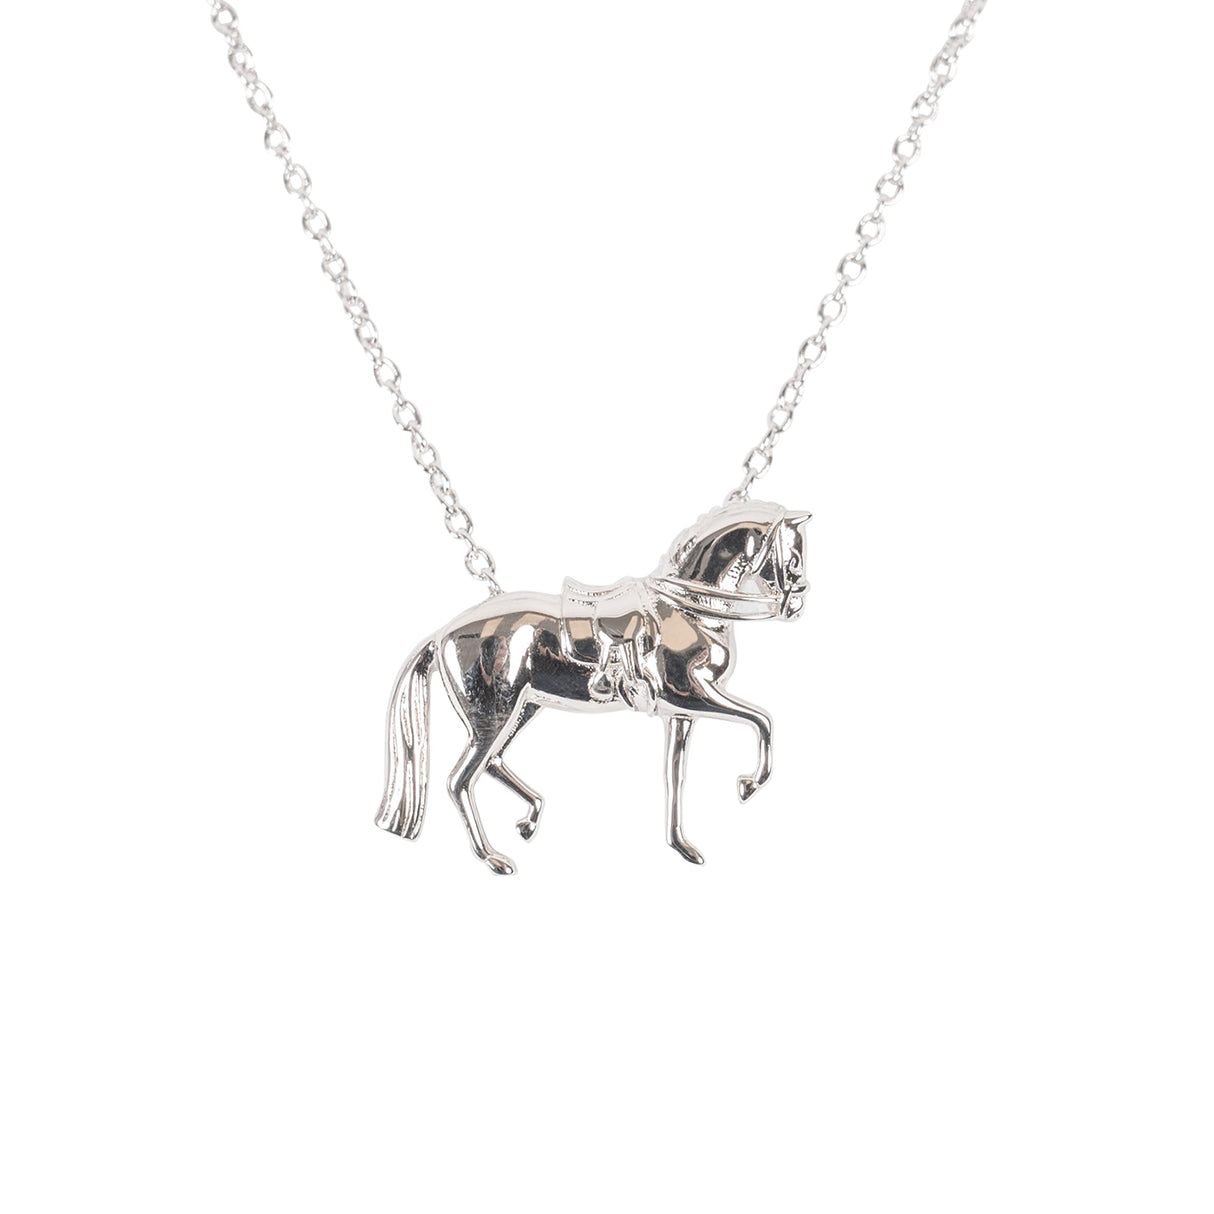 Cinto by Kelly Herd Dressage Pendant Necklace